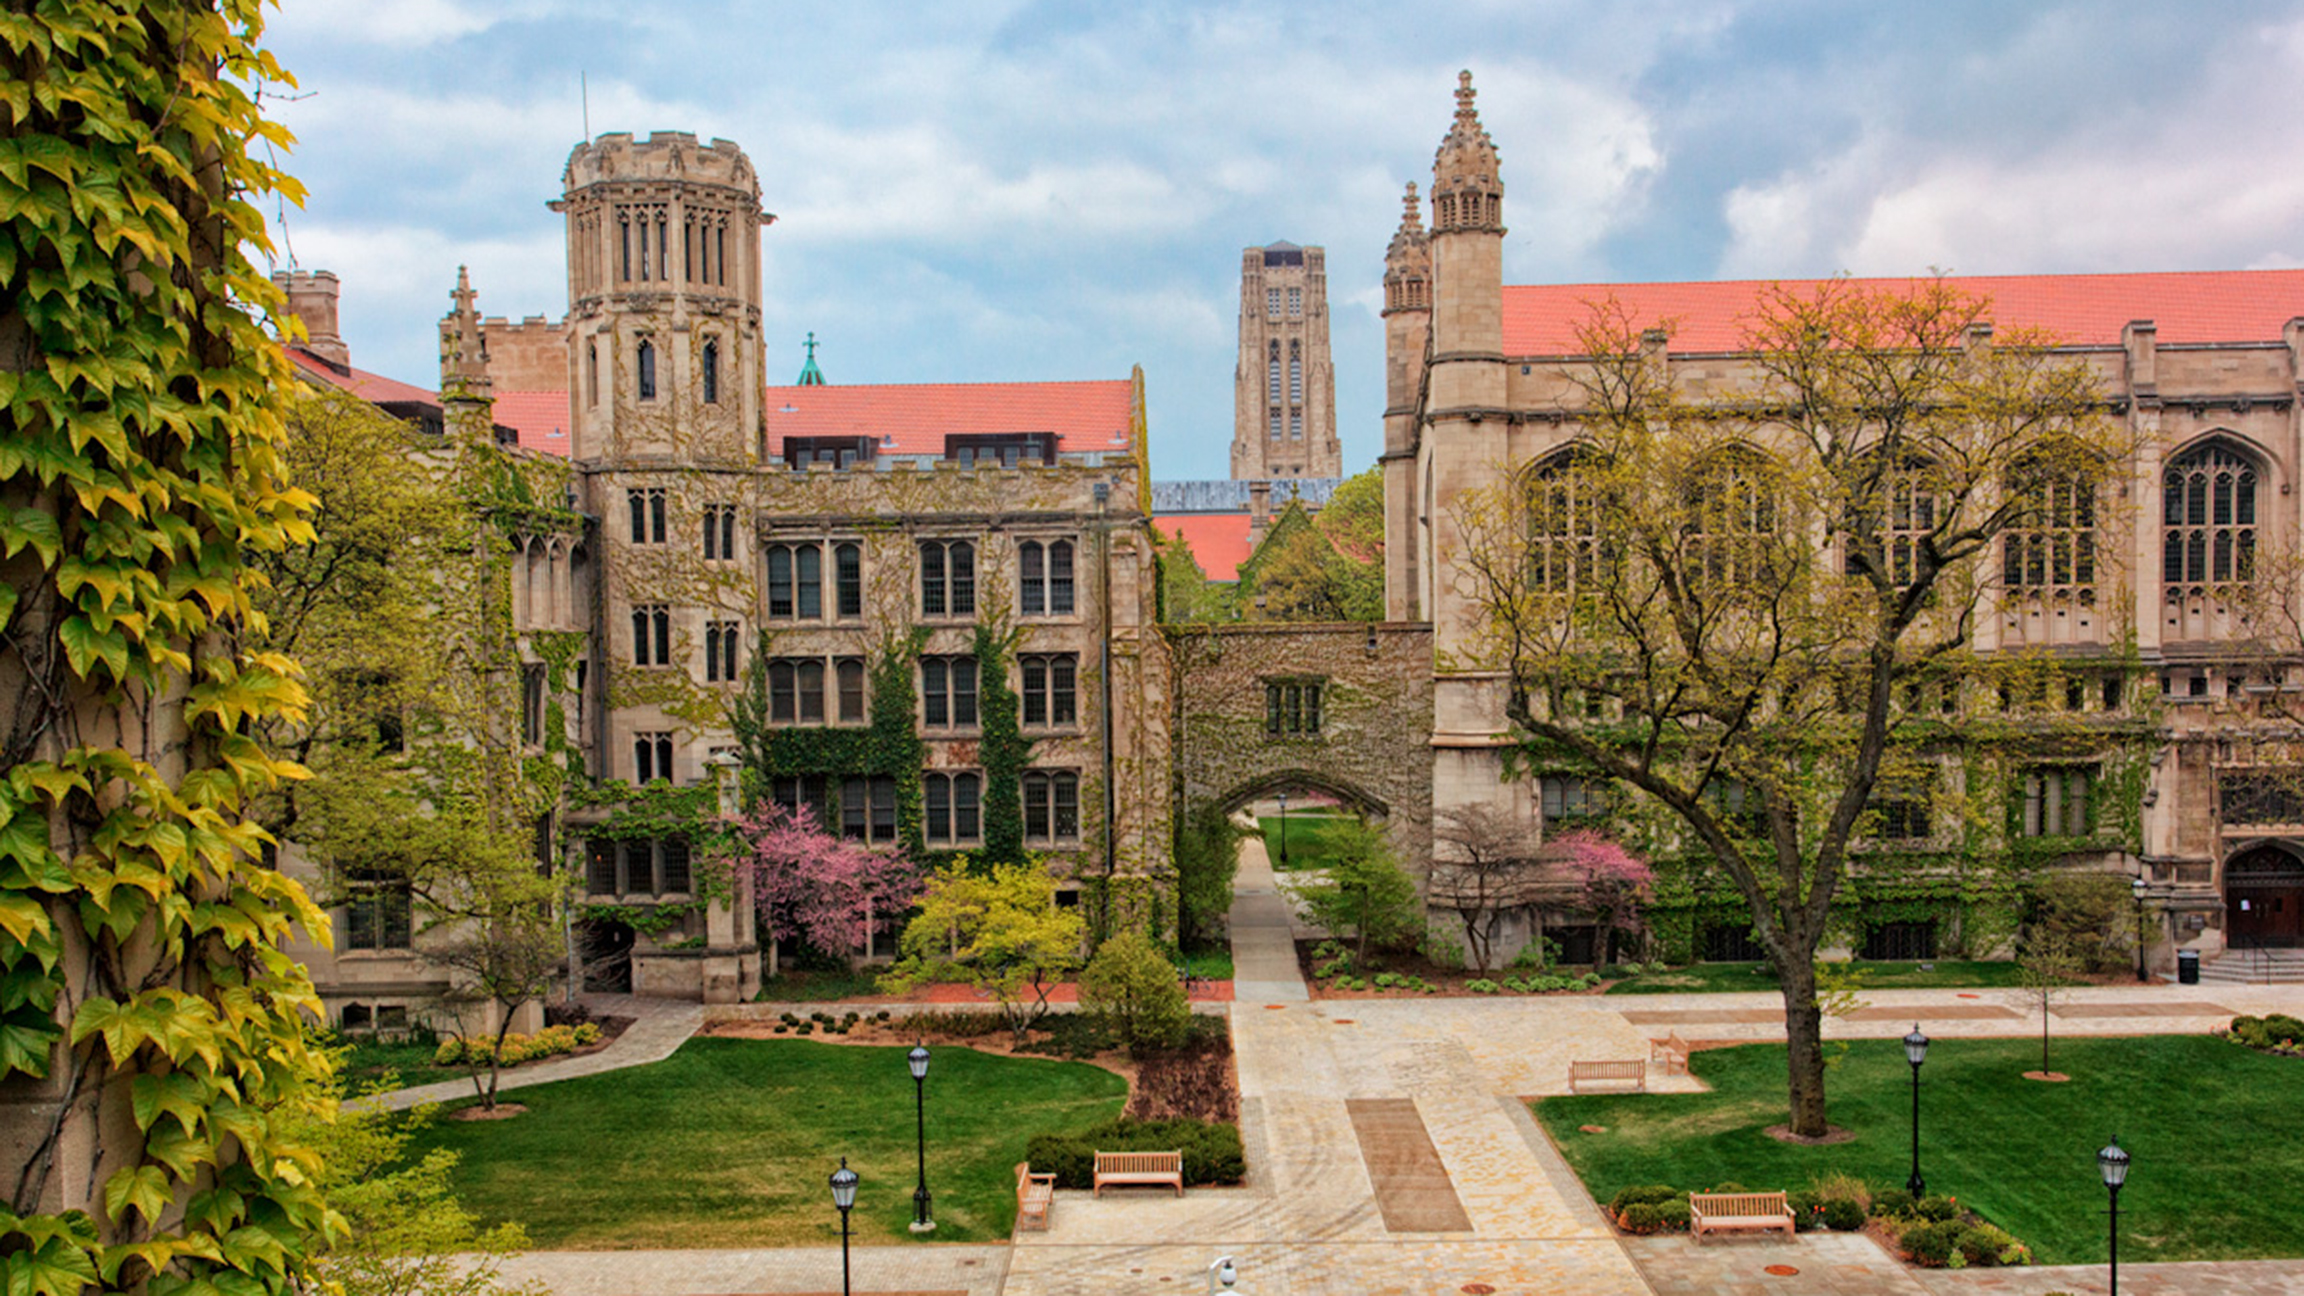 university-of-chicago-ties-for-no-3-spot-on-best-colleges-list-chicago-news-wttw